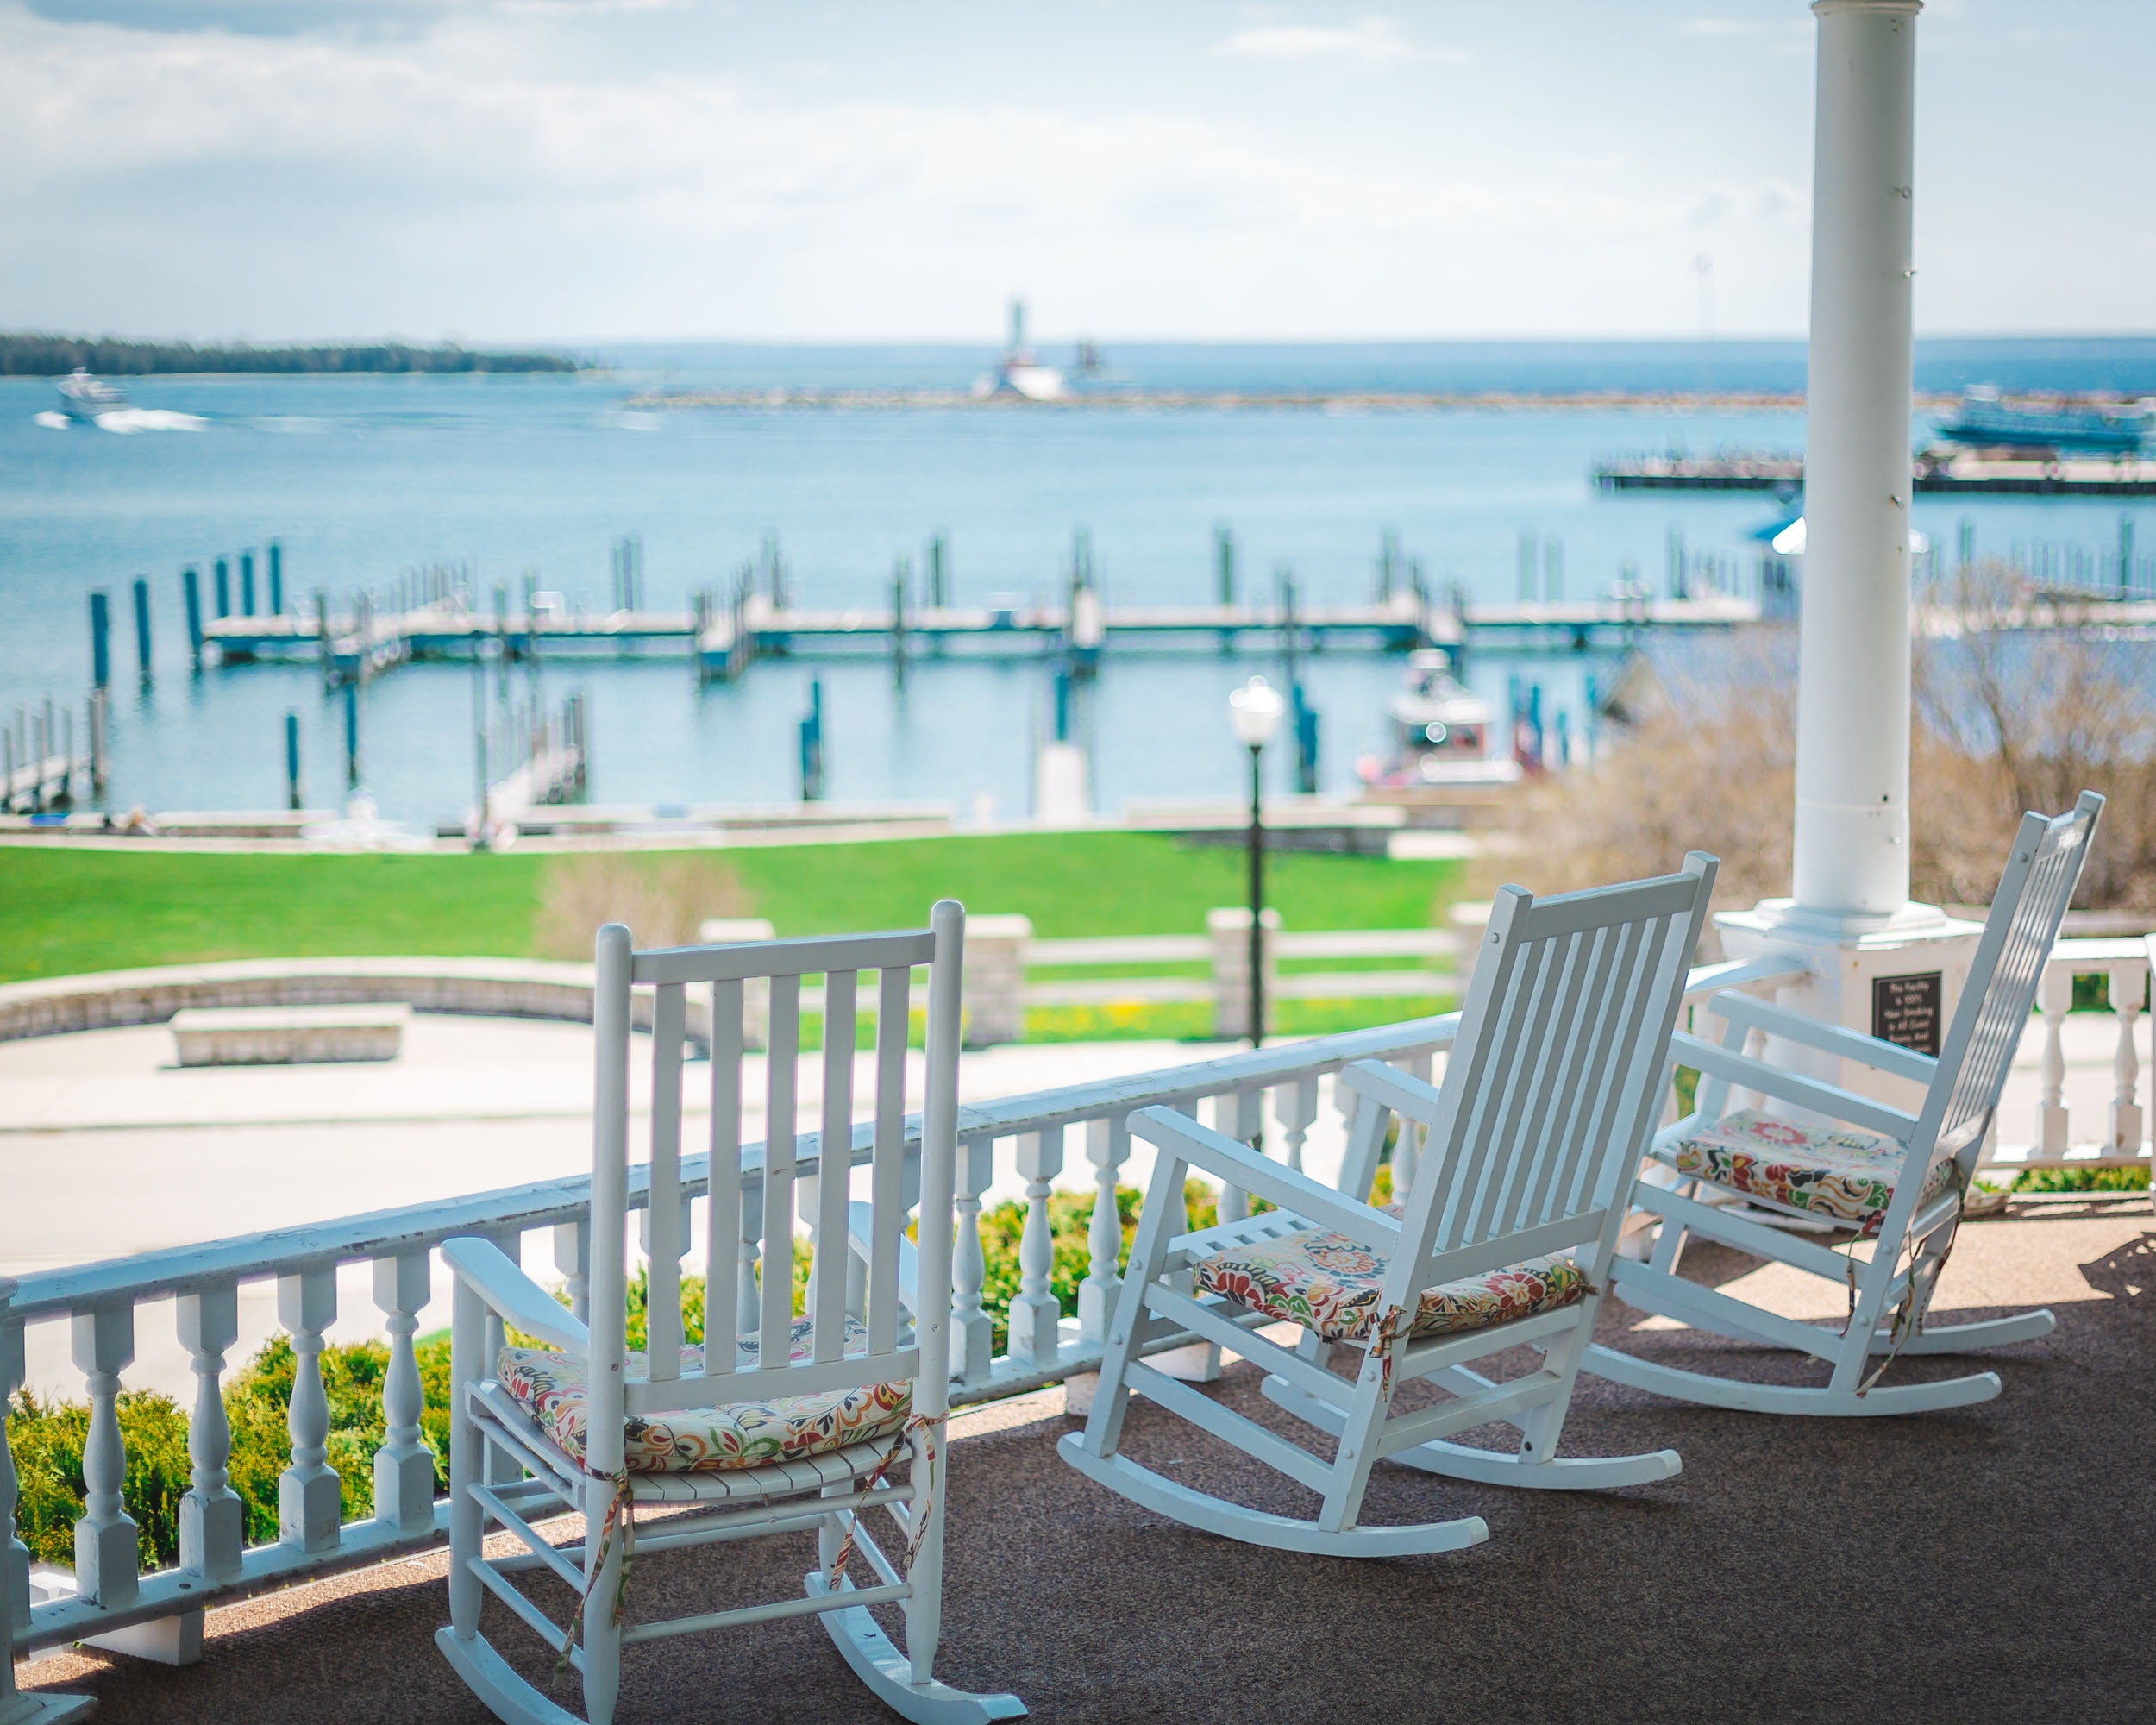 Island House Hotel Mackinac Island Fall Getaway - Enjoy the view from the front porch of Island House Hotel